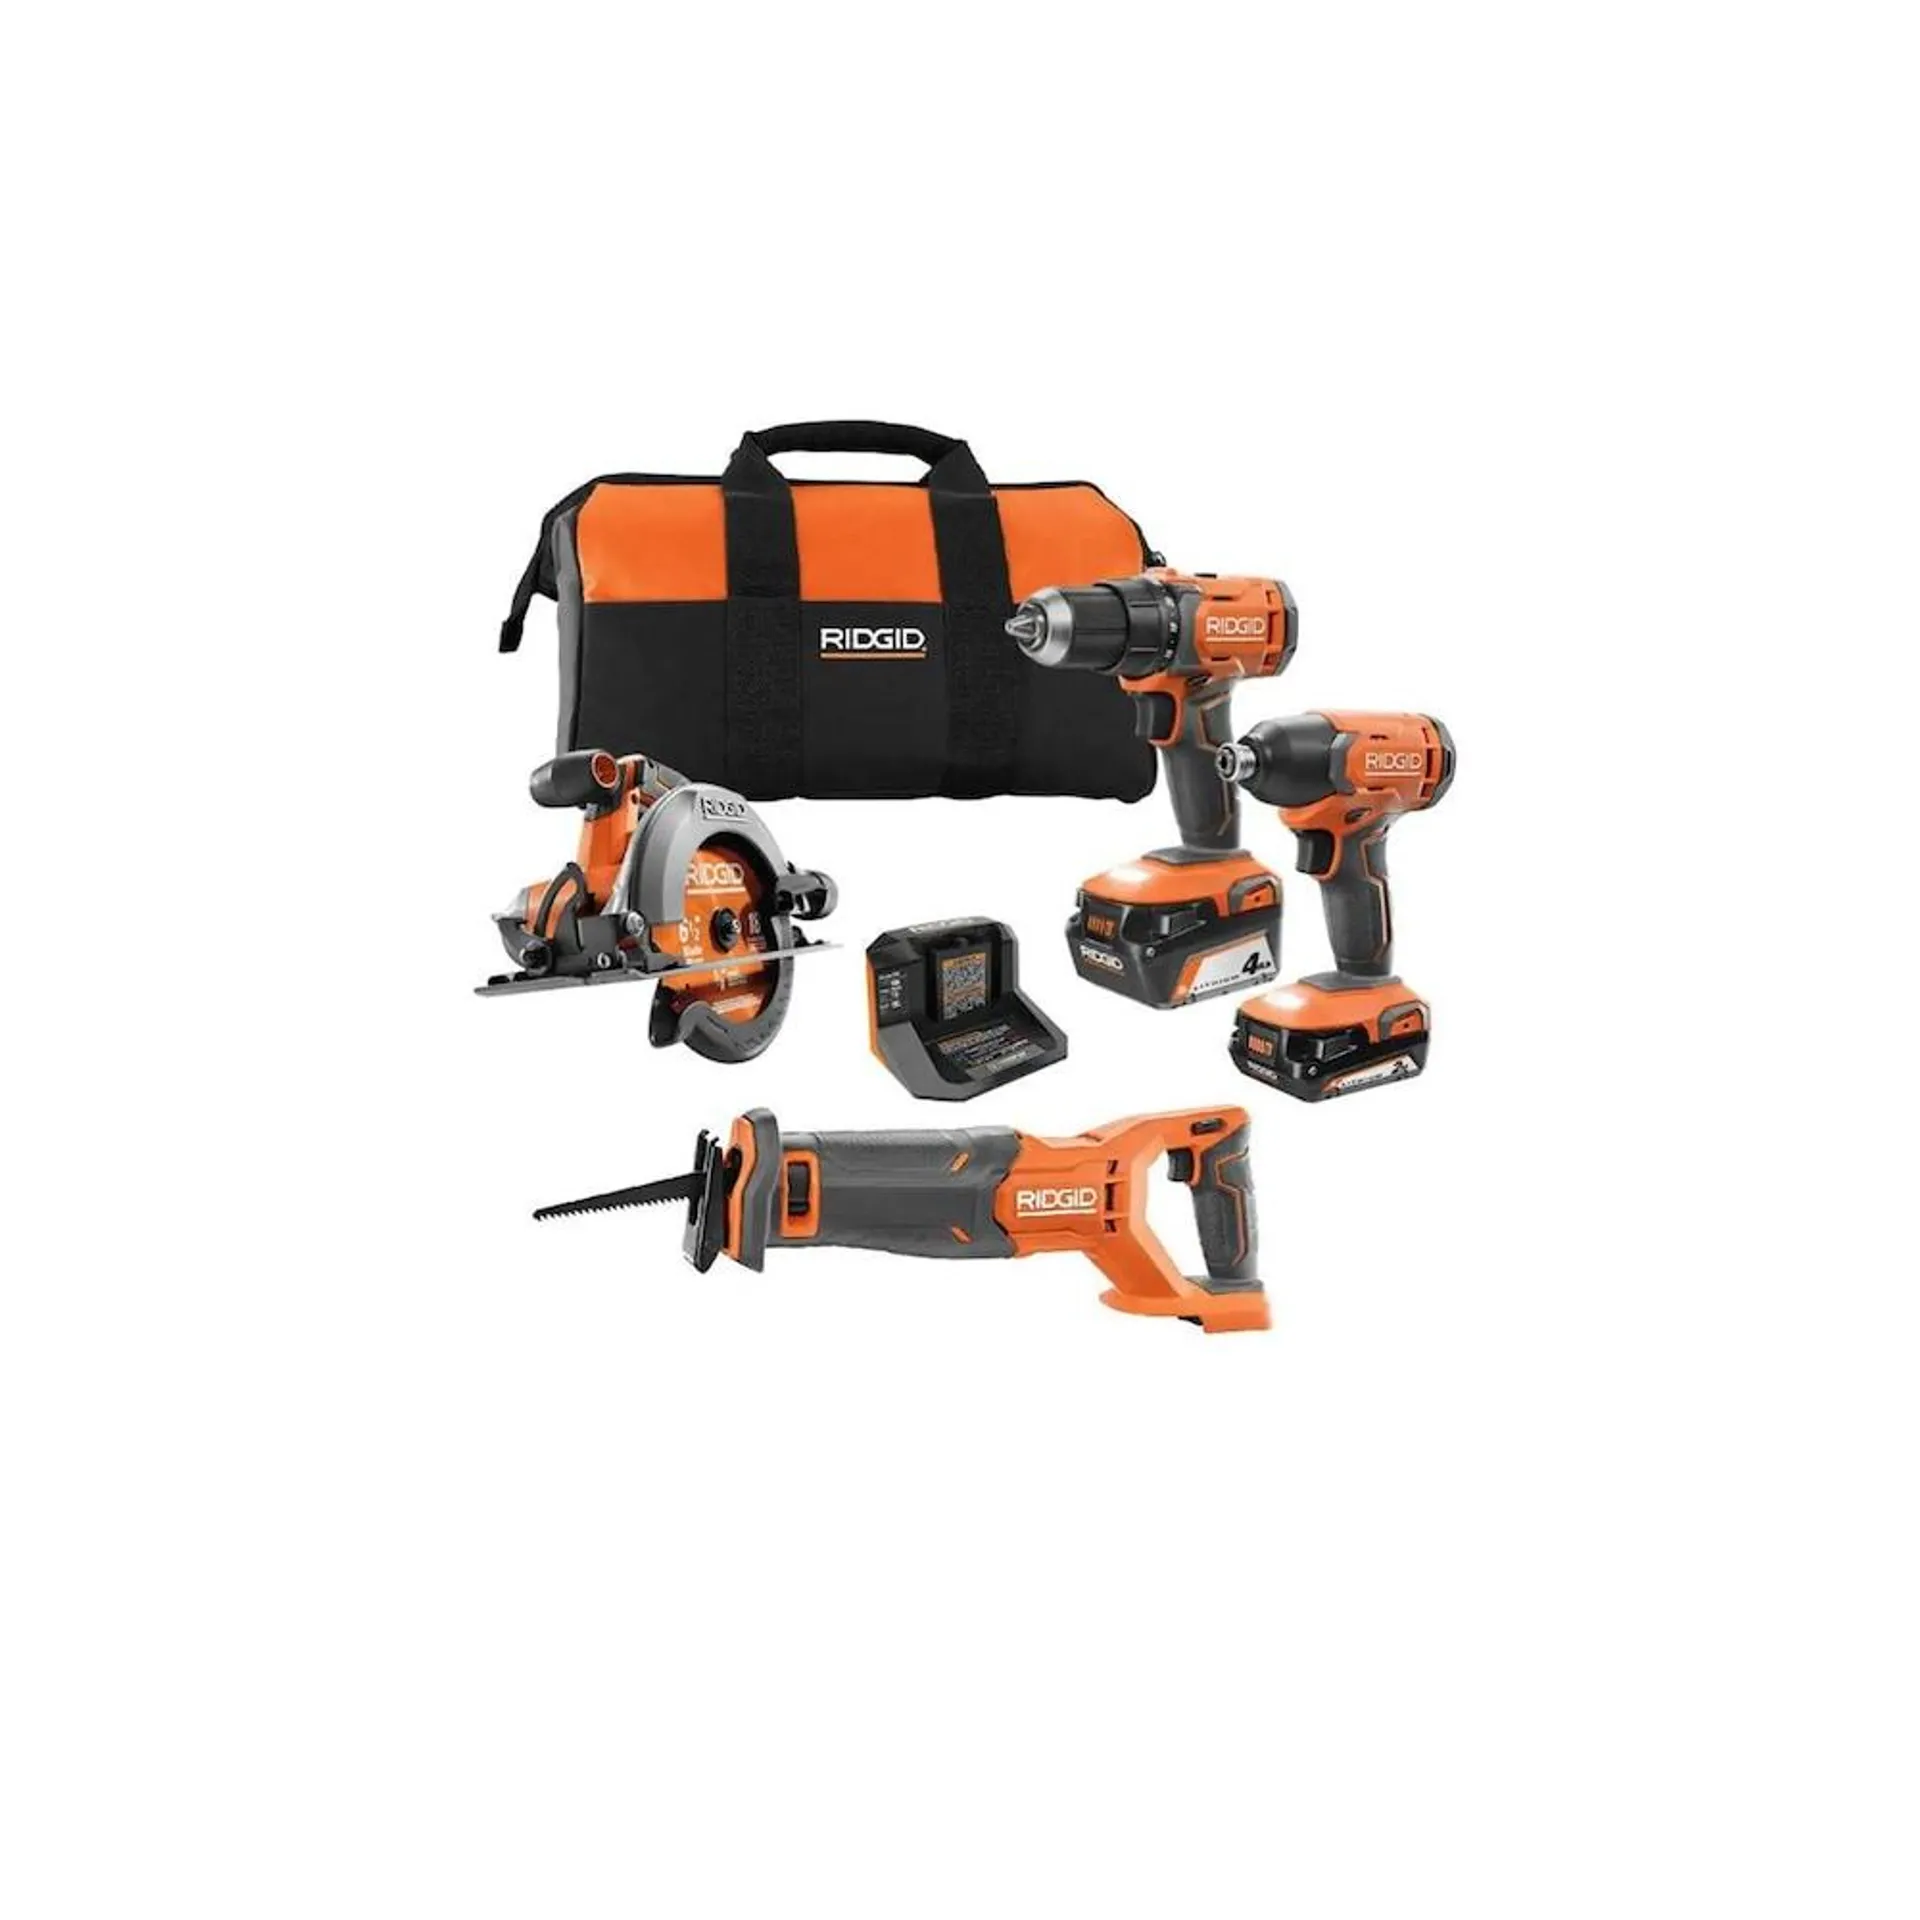 18V Cordless 4-Tool Kit with 4.0 Ah Battery, 2.0 Ah Battery, Charger, and Bag